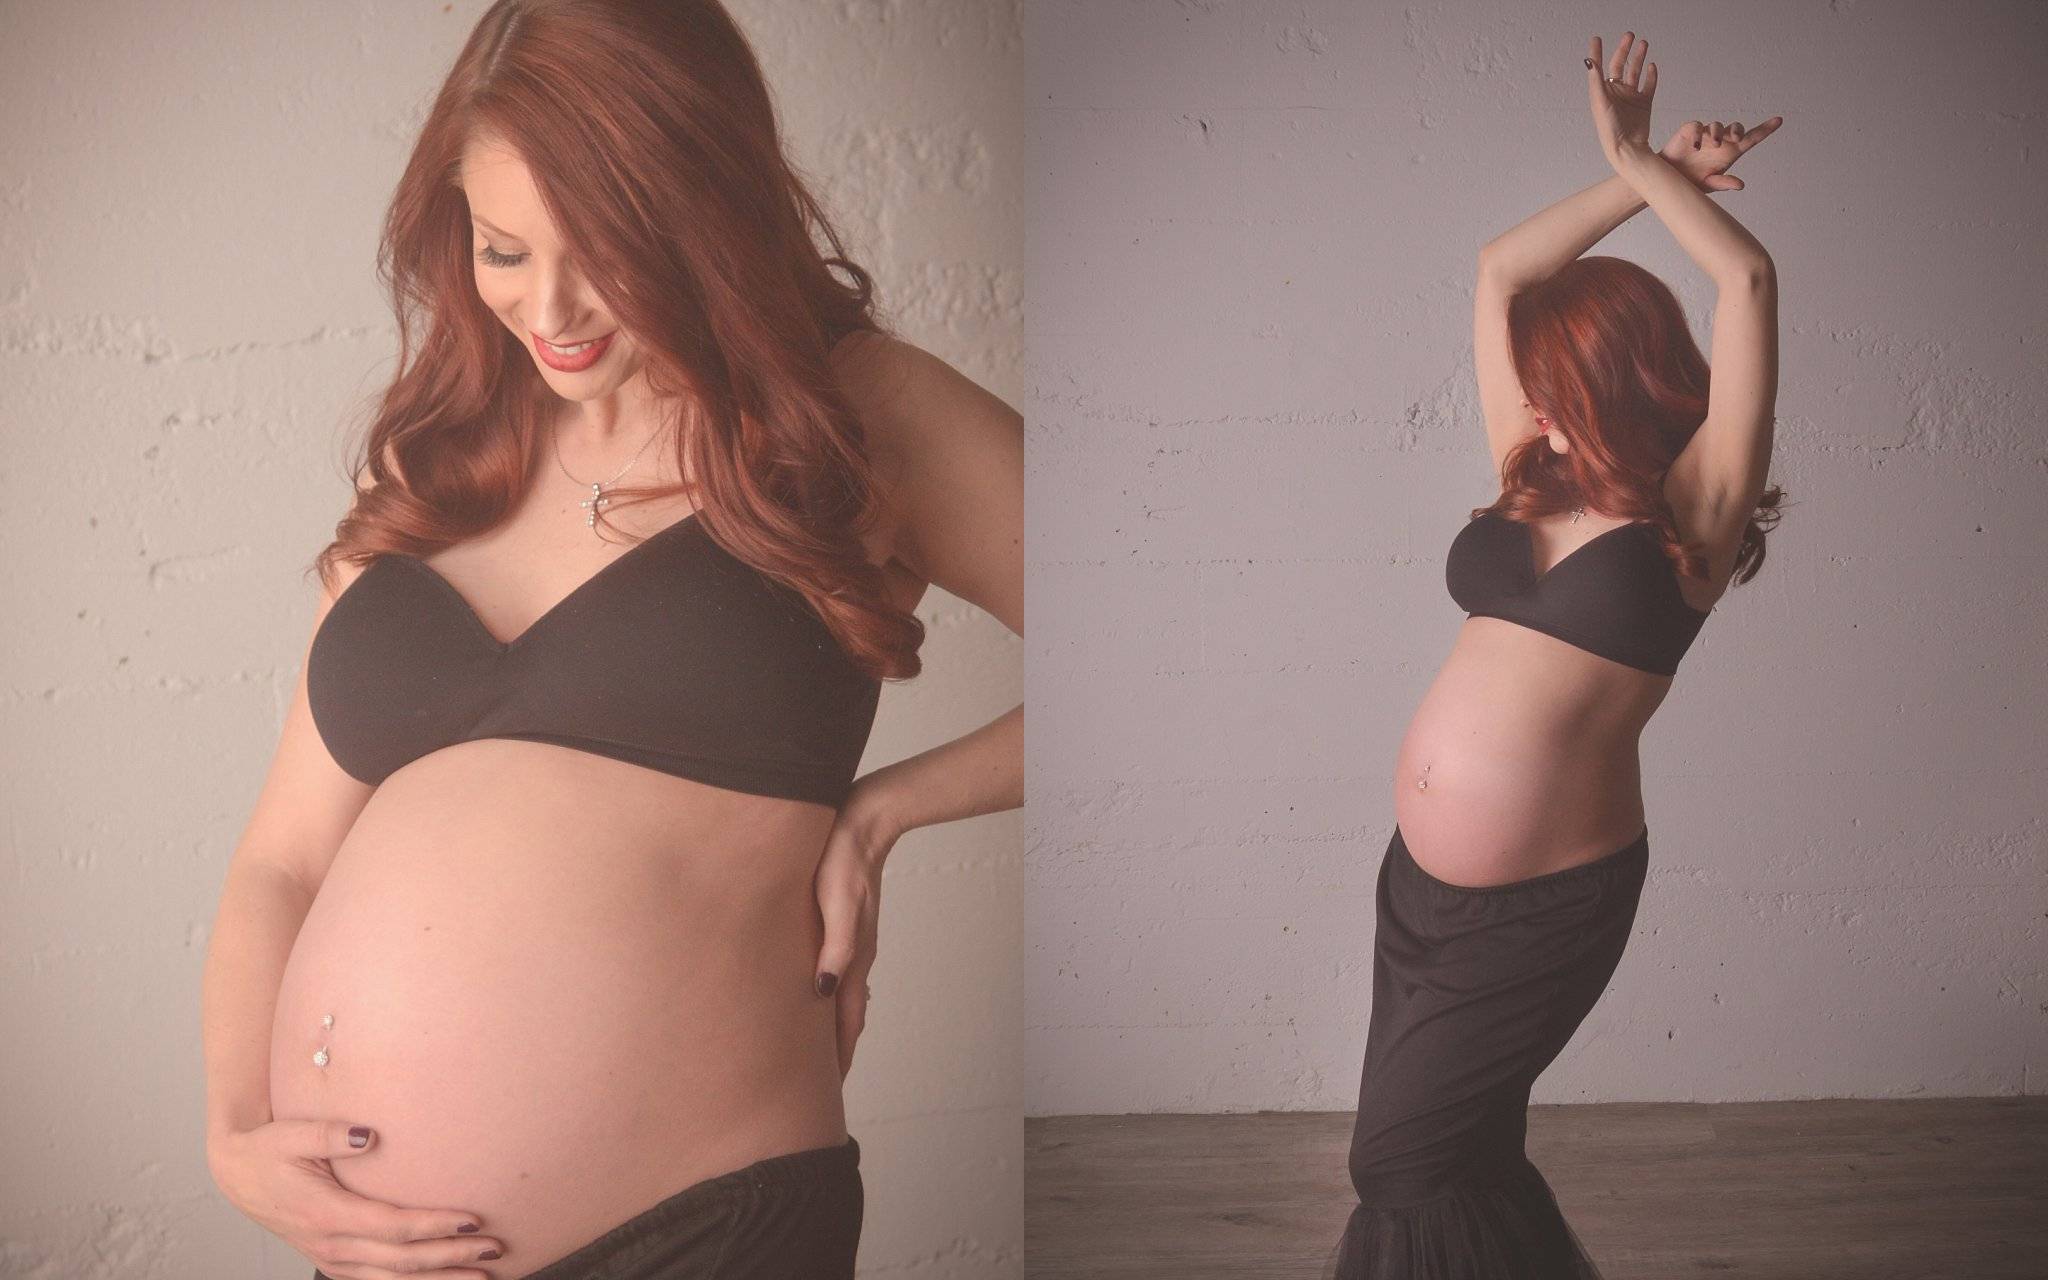 Two pictures of a pregnant woman posing in a black dress.